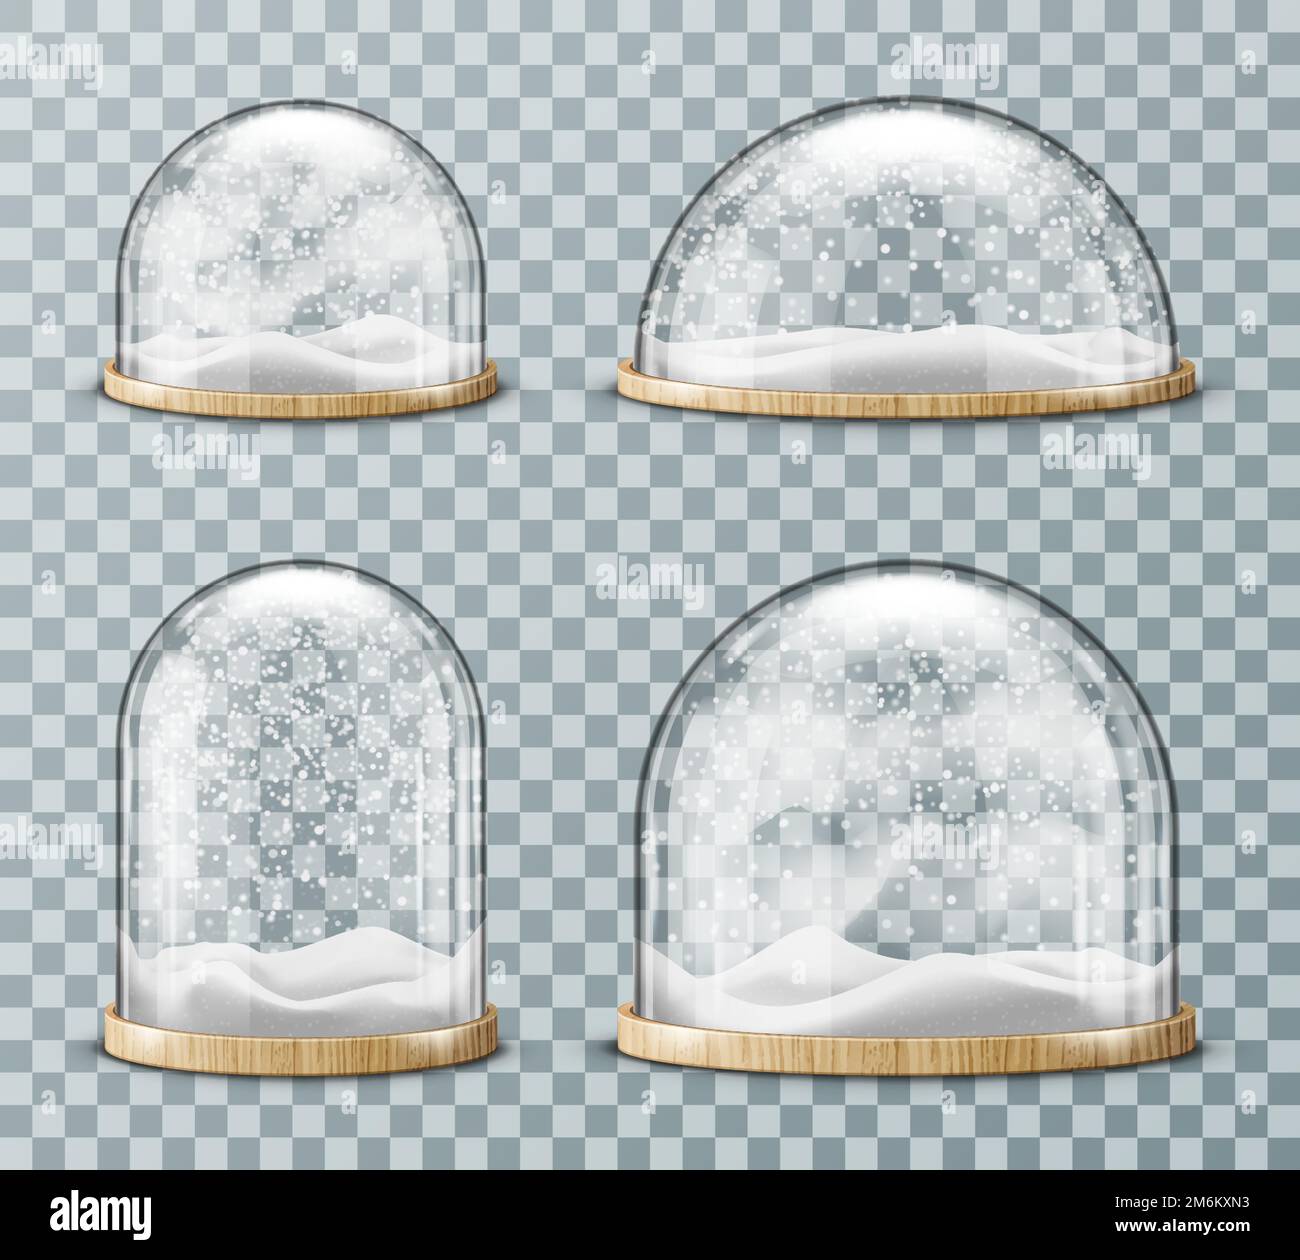 Glass dome with snow realistic vector. Glass round dome of various shapes with light wood plate and white falling snowflakes, isolated on transparent background. Christmas souvenir Stock Vector